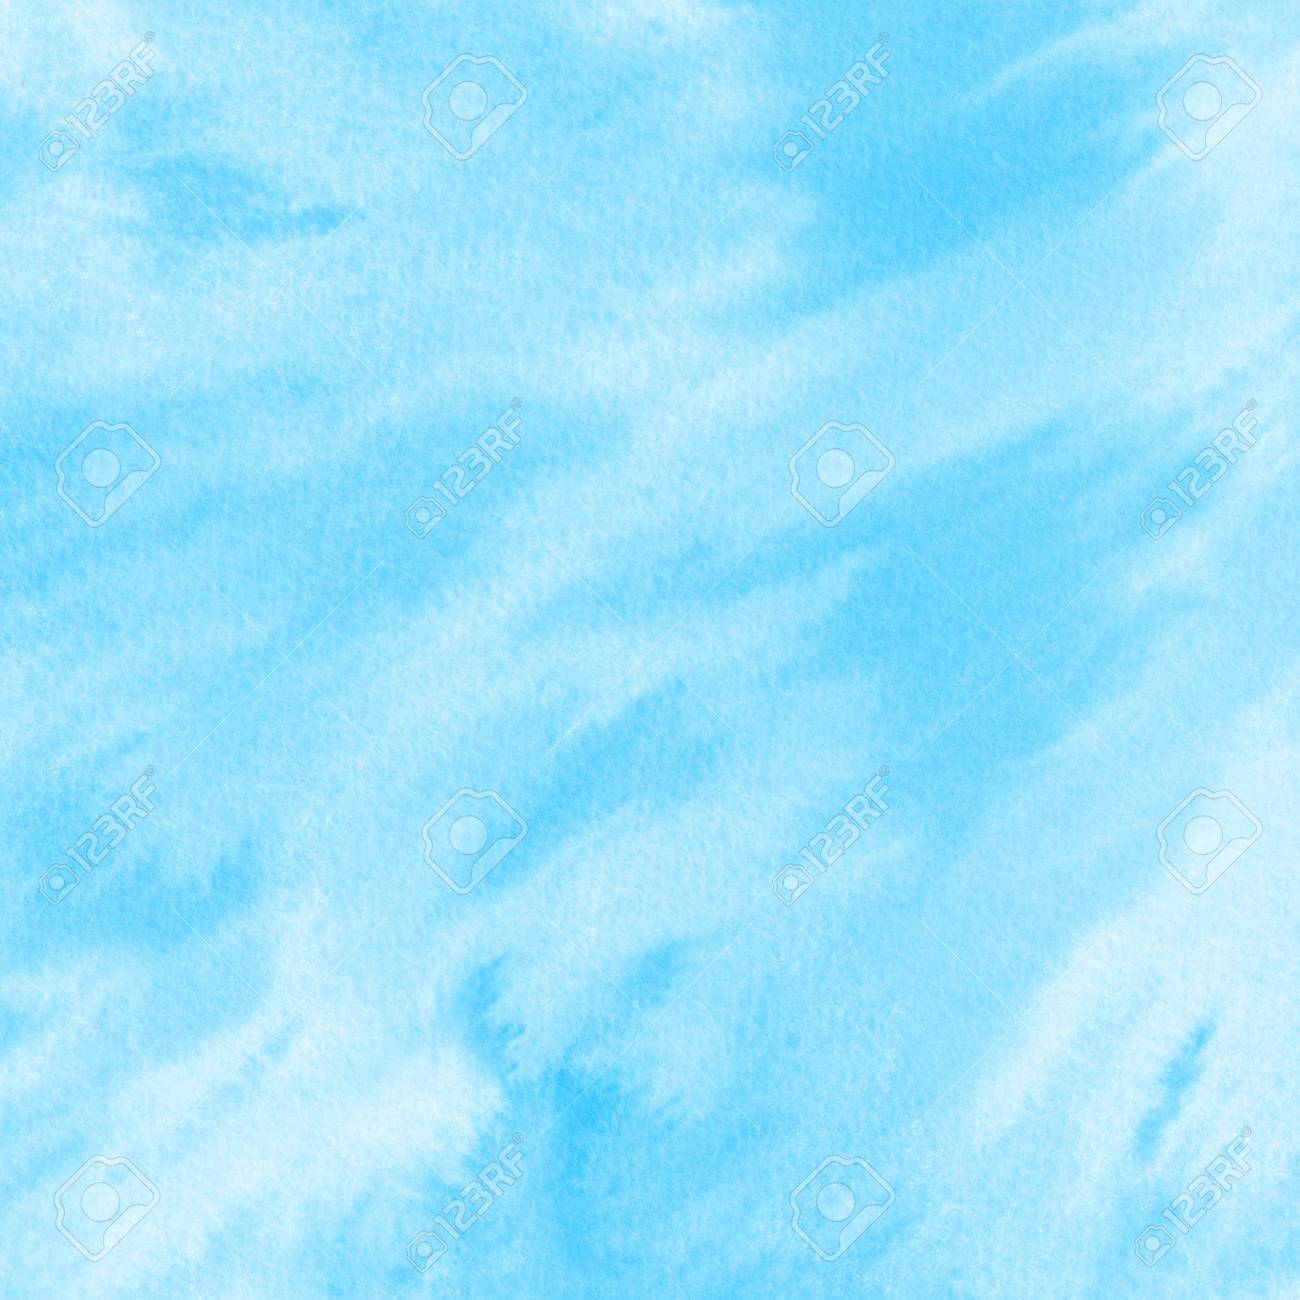 Sky Blue Watercolor Stains Square Background Easter Spring